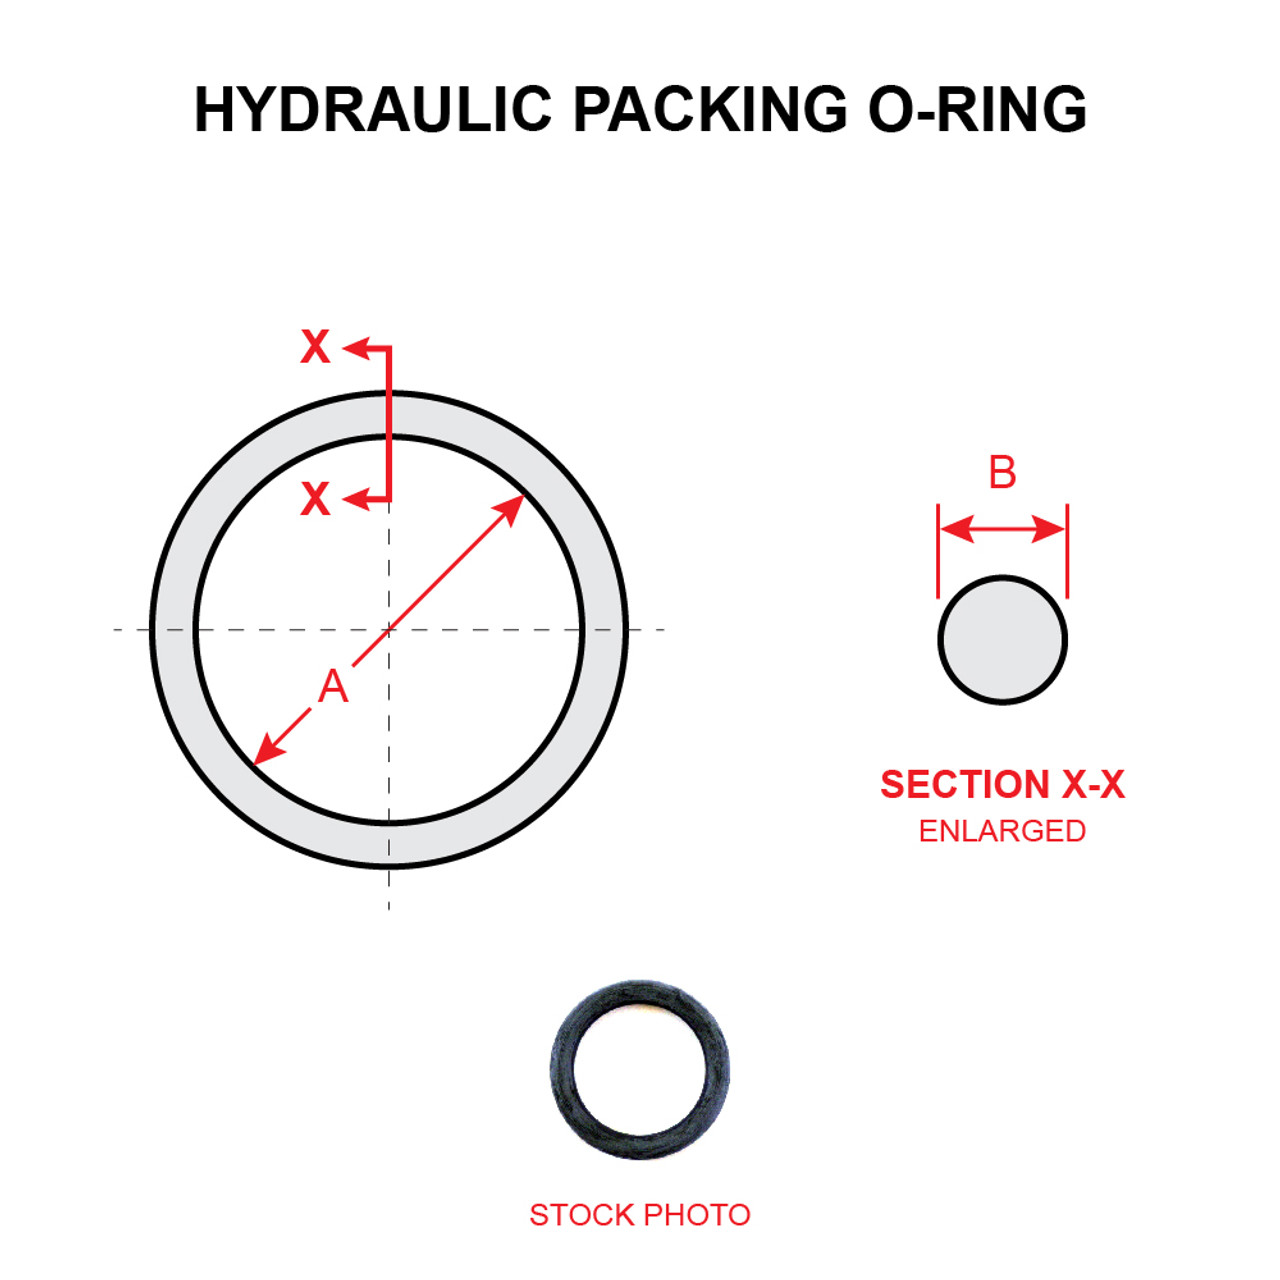 MS28775-329   HYDRAULIC PACKING O-RING